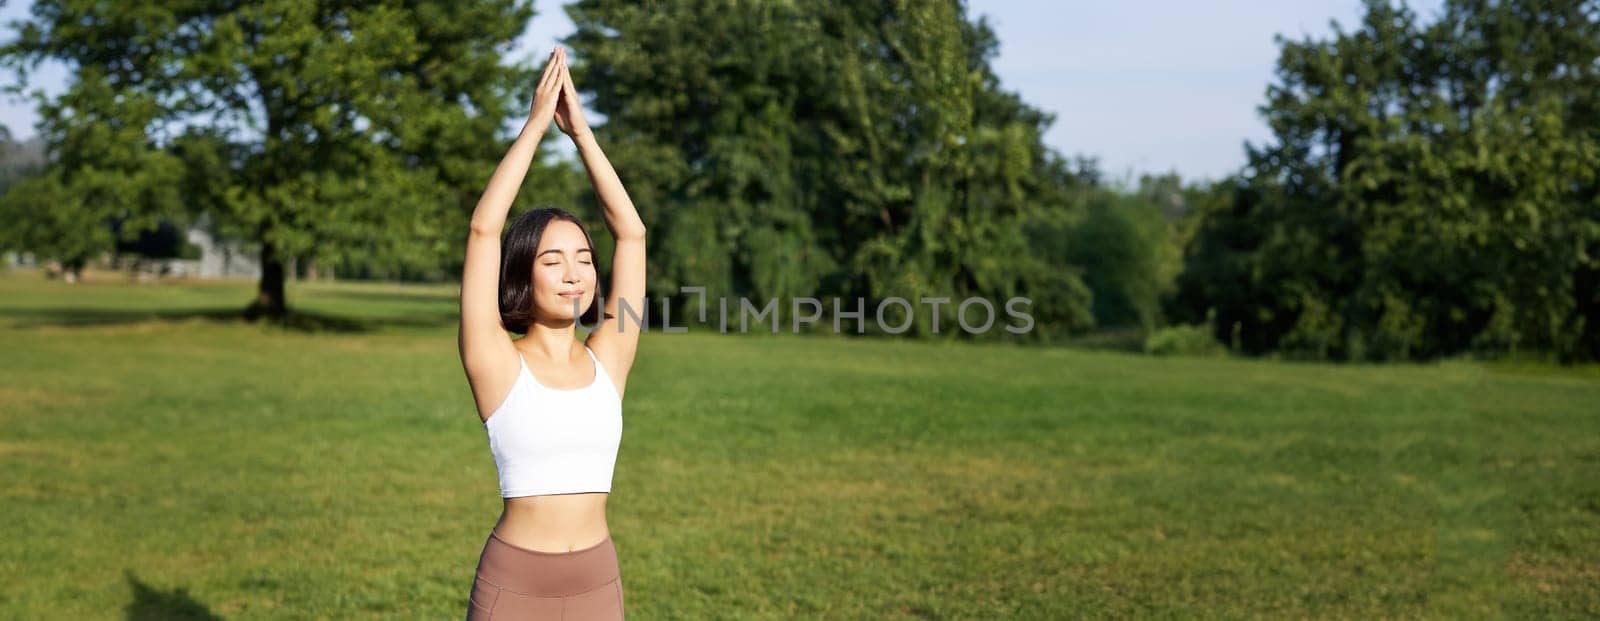 Smiling young fitness girl on rubber mat, workout in park, raising hands up in tree pose, doing yoga training on fresh green lawn.